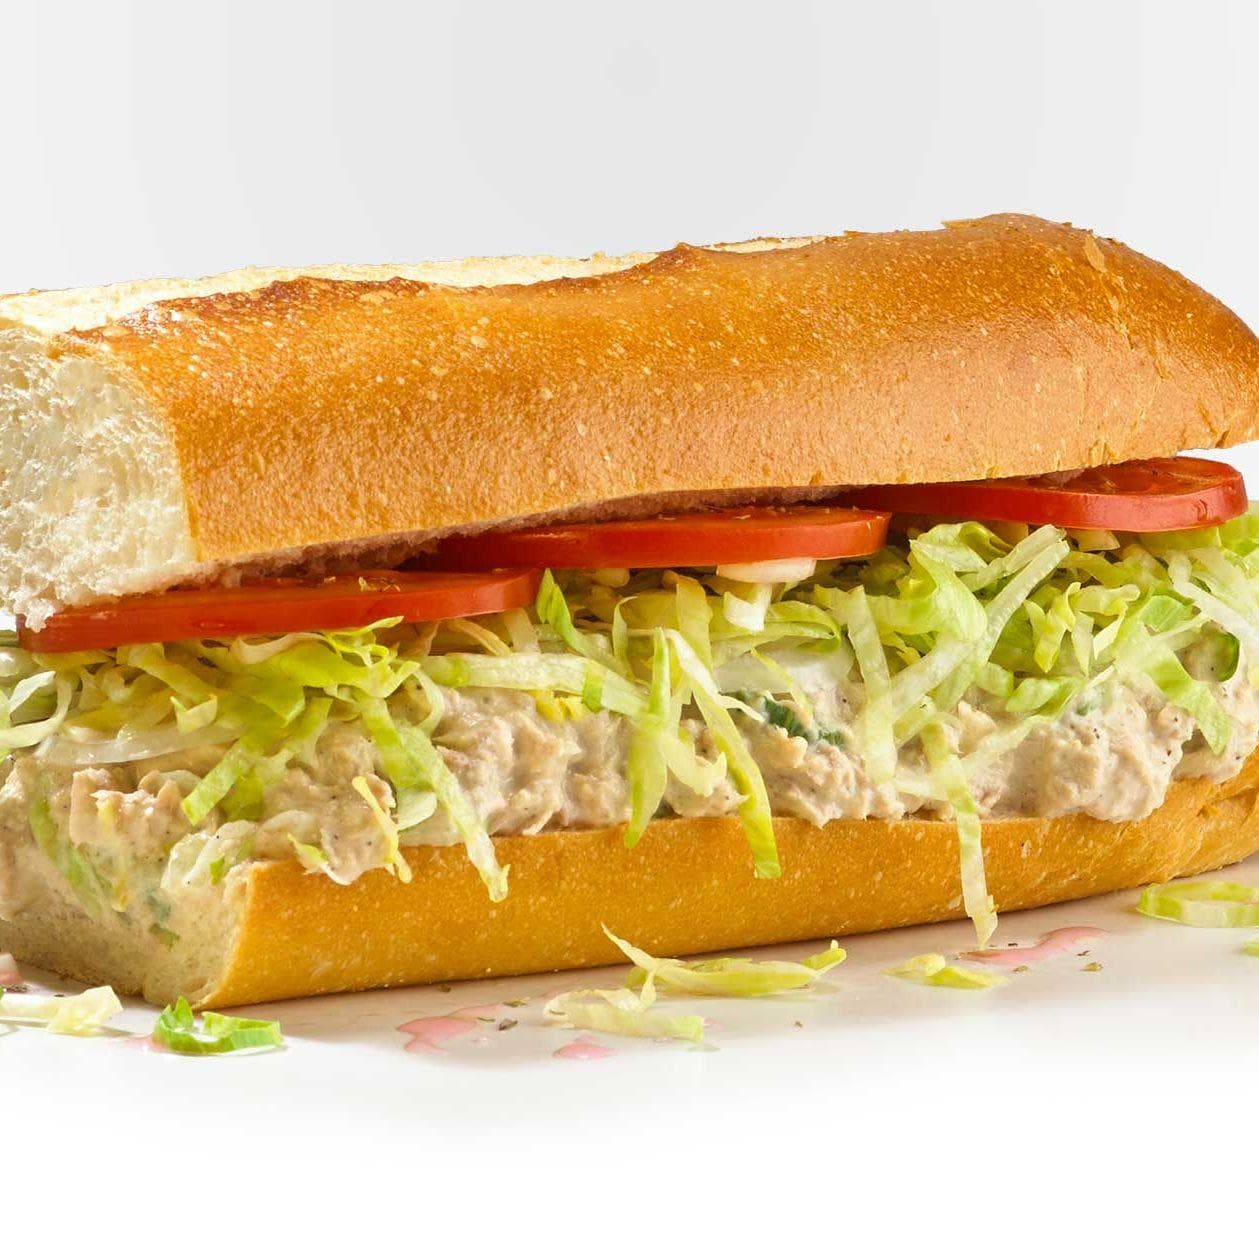 best sub from jersey mike's